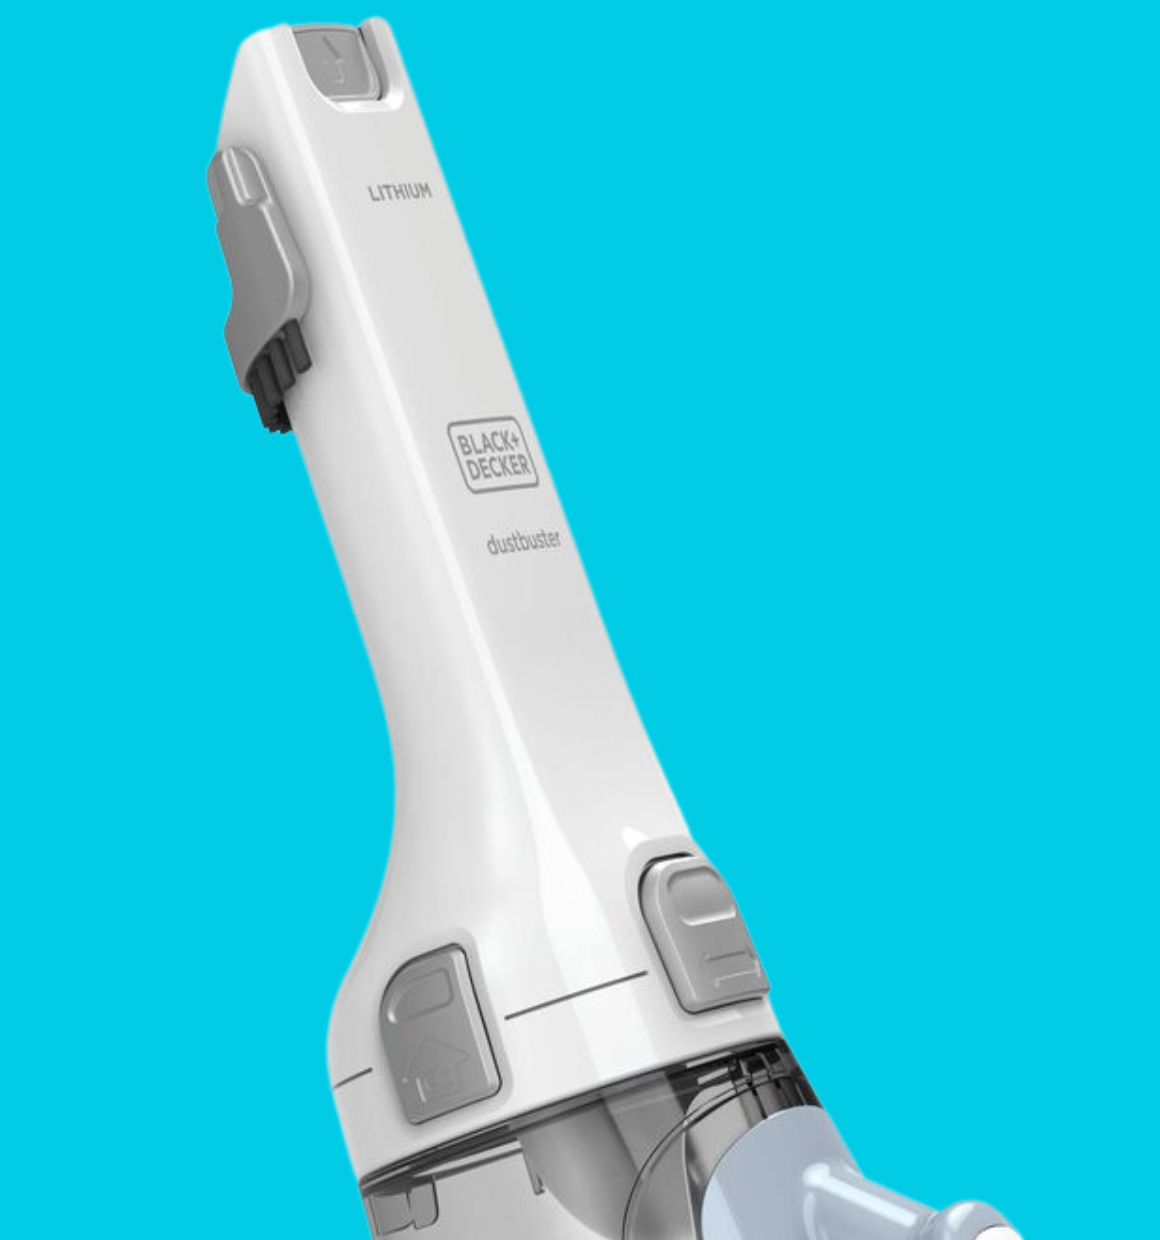 BLACK+DECKER dustbuster AdvancedClean Cordless Handheld Vacuum, Compact  Home and Car Vacuum with Crevice Tool (CHV1410L)